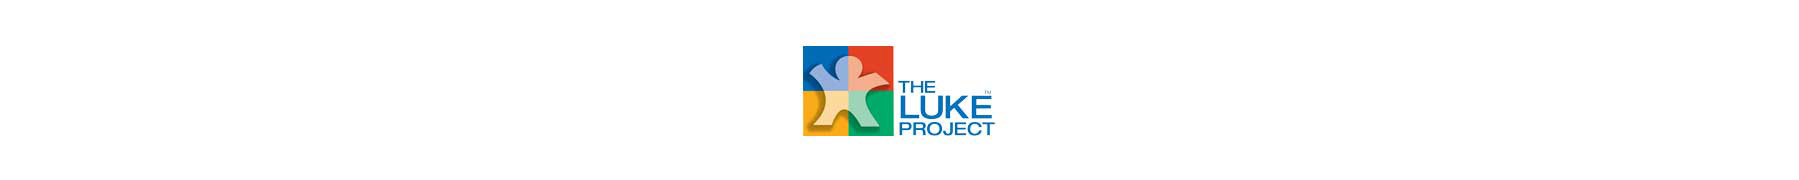 The Luke Project Home